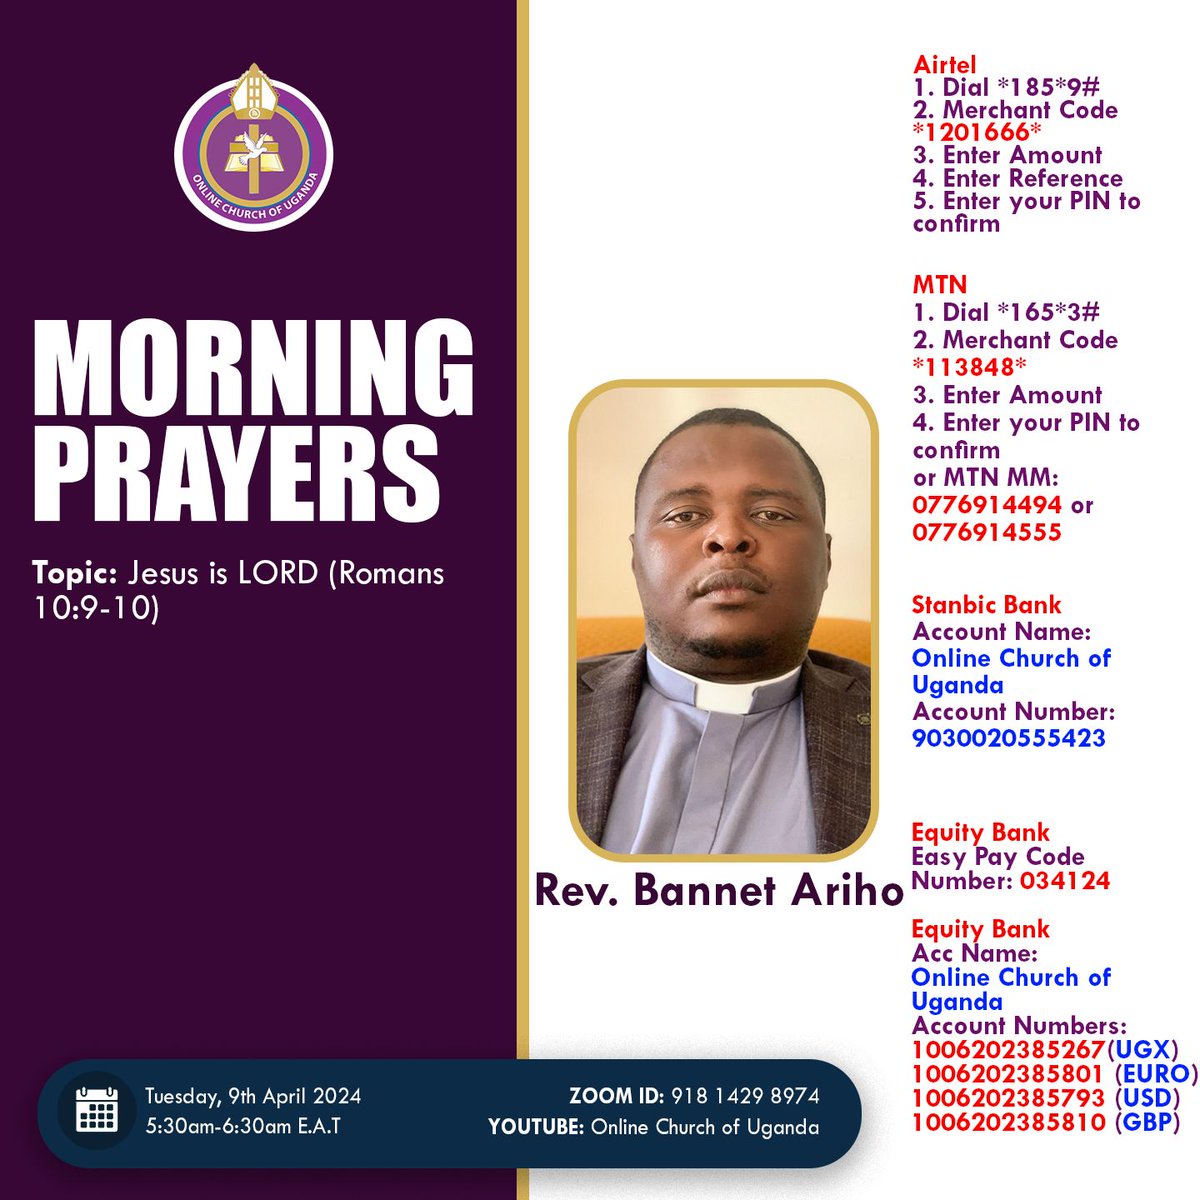 Morning Prayers. Click on Zoom link.zoom.us/j/91814298974 to join.